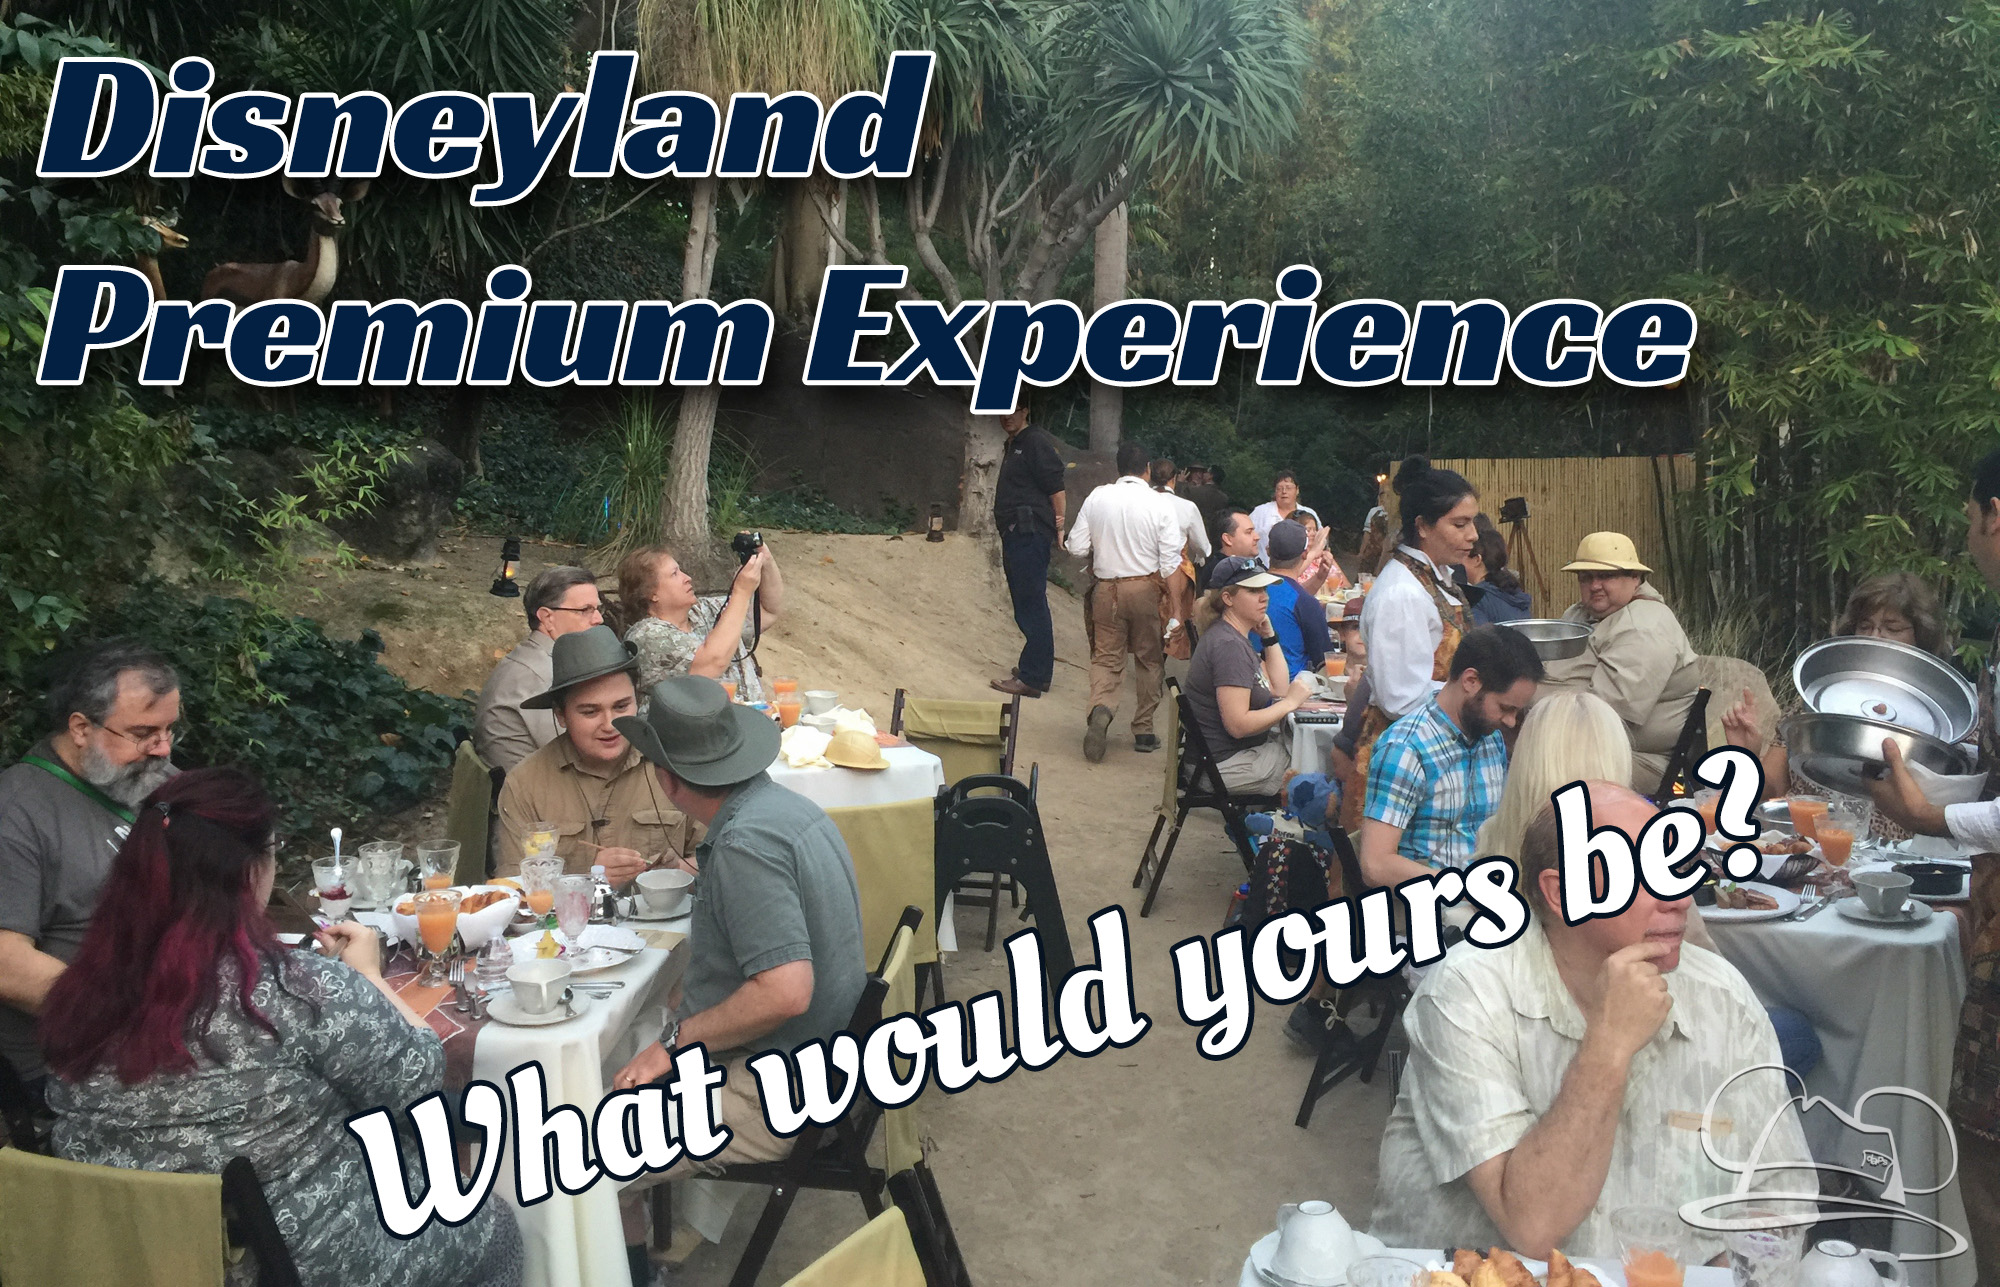 Disneyland Premium Experience – What Would You Want?